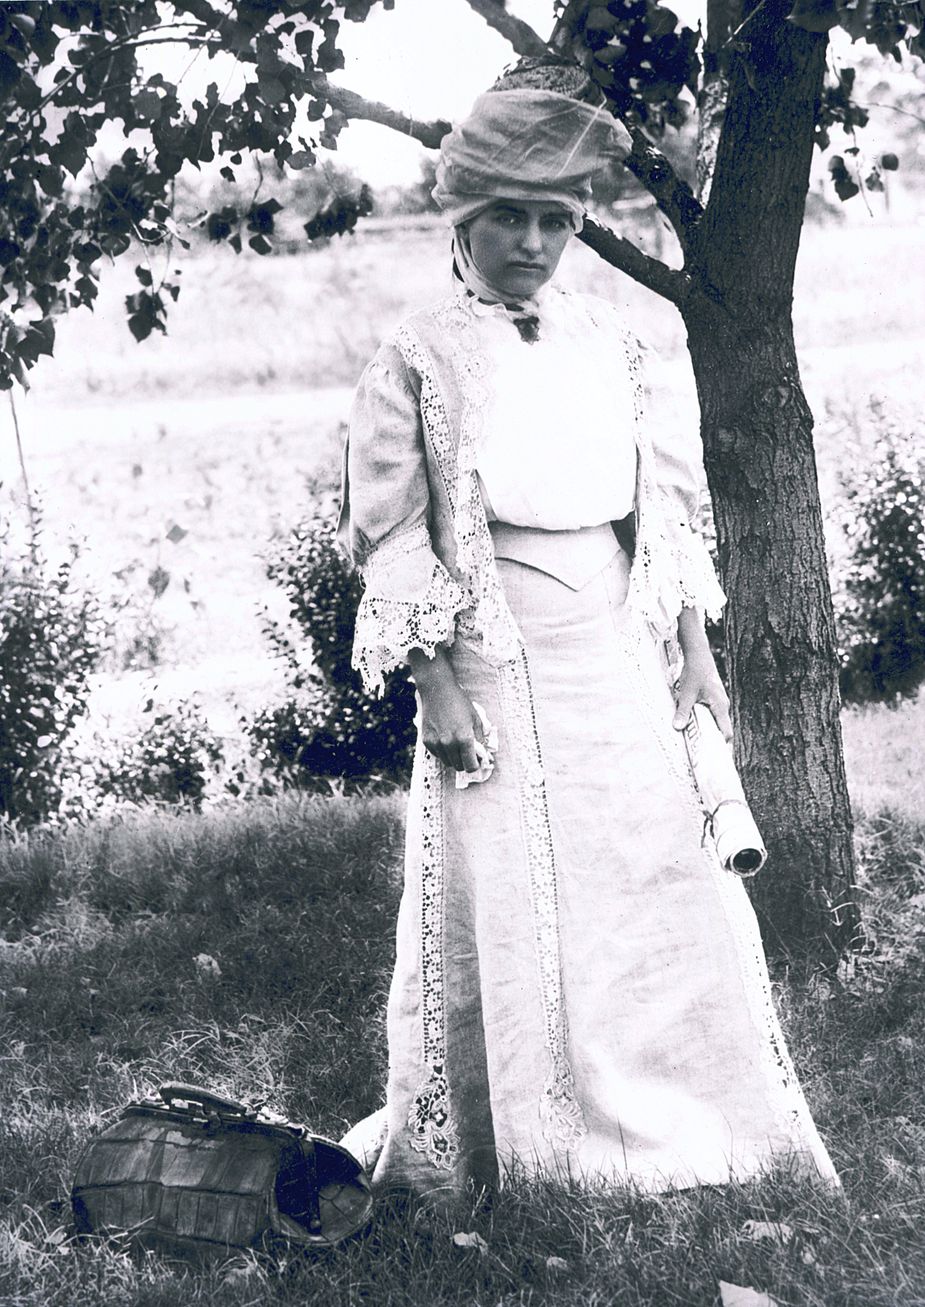 Kate Barnard was a leader in Oklahoma's early political landscape. A tireless advocate for the poor and disenfranchised, she helped shape the state's prison and child labor laws. Photo courtesy Museum of the Western Prairie